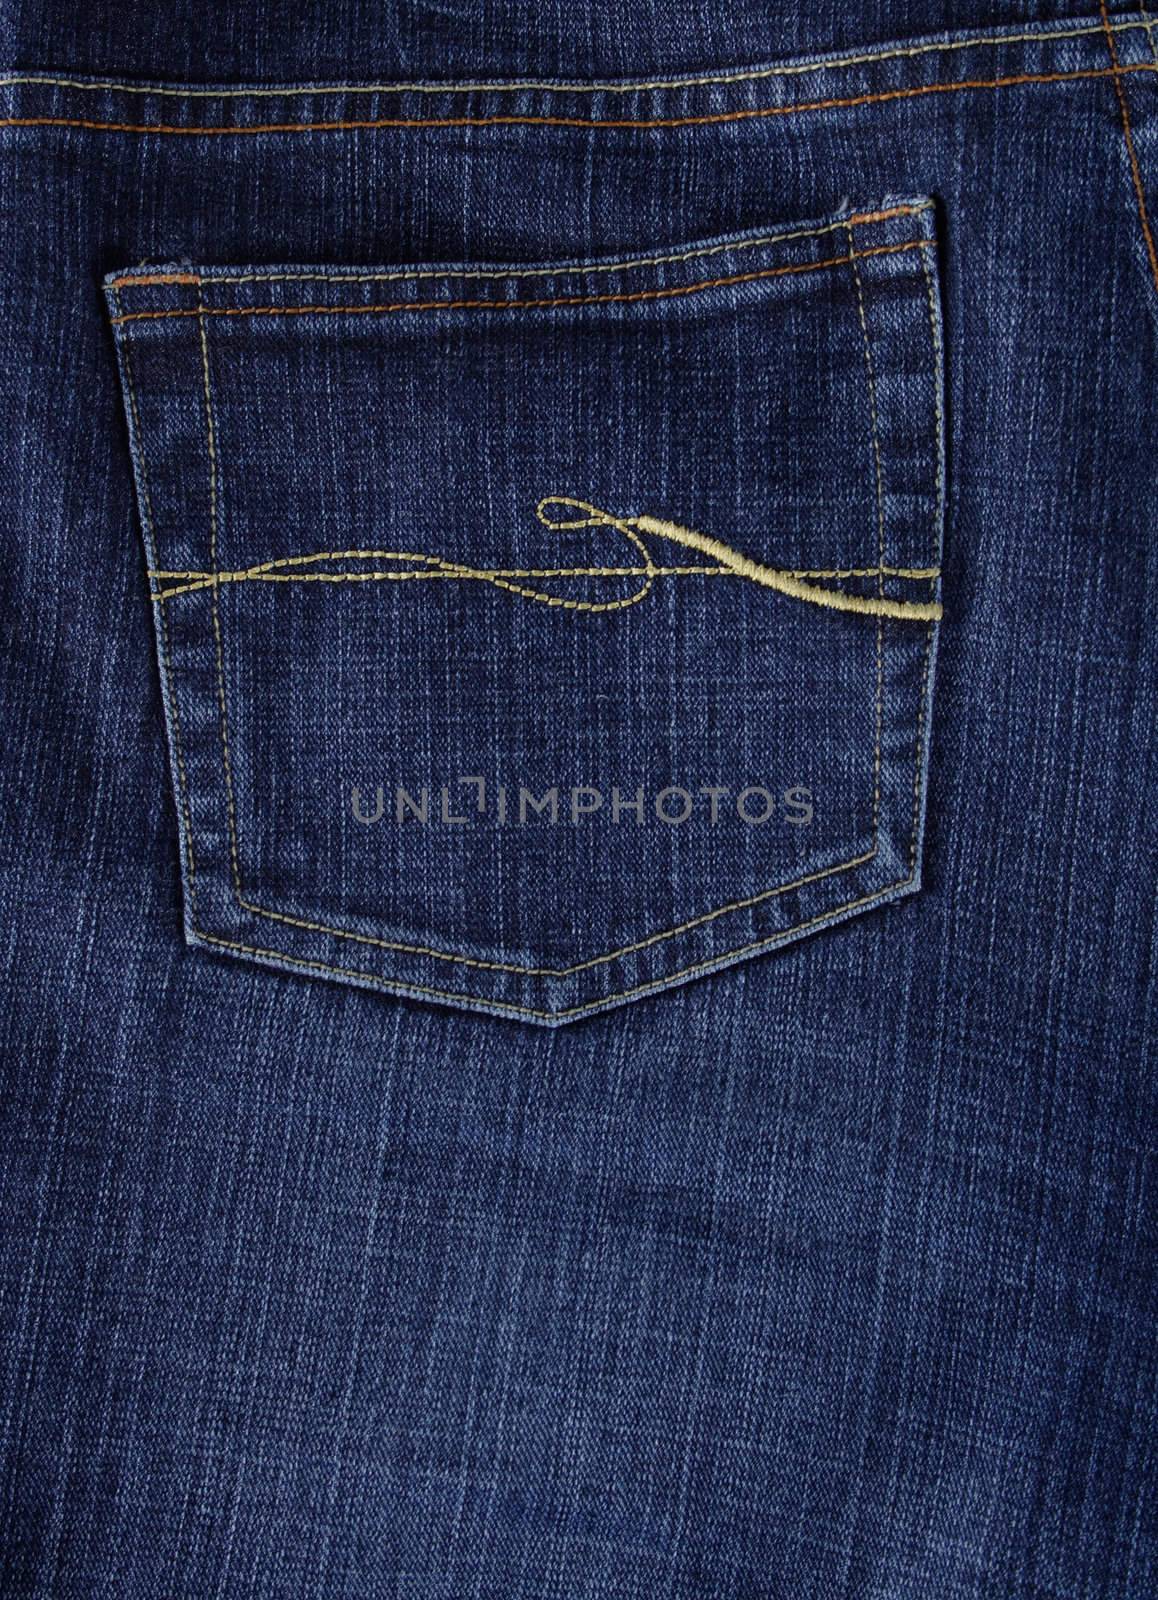 jeans background by aguirre_mar